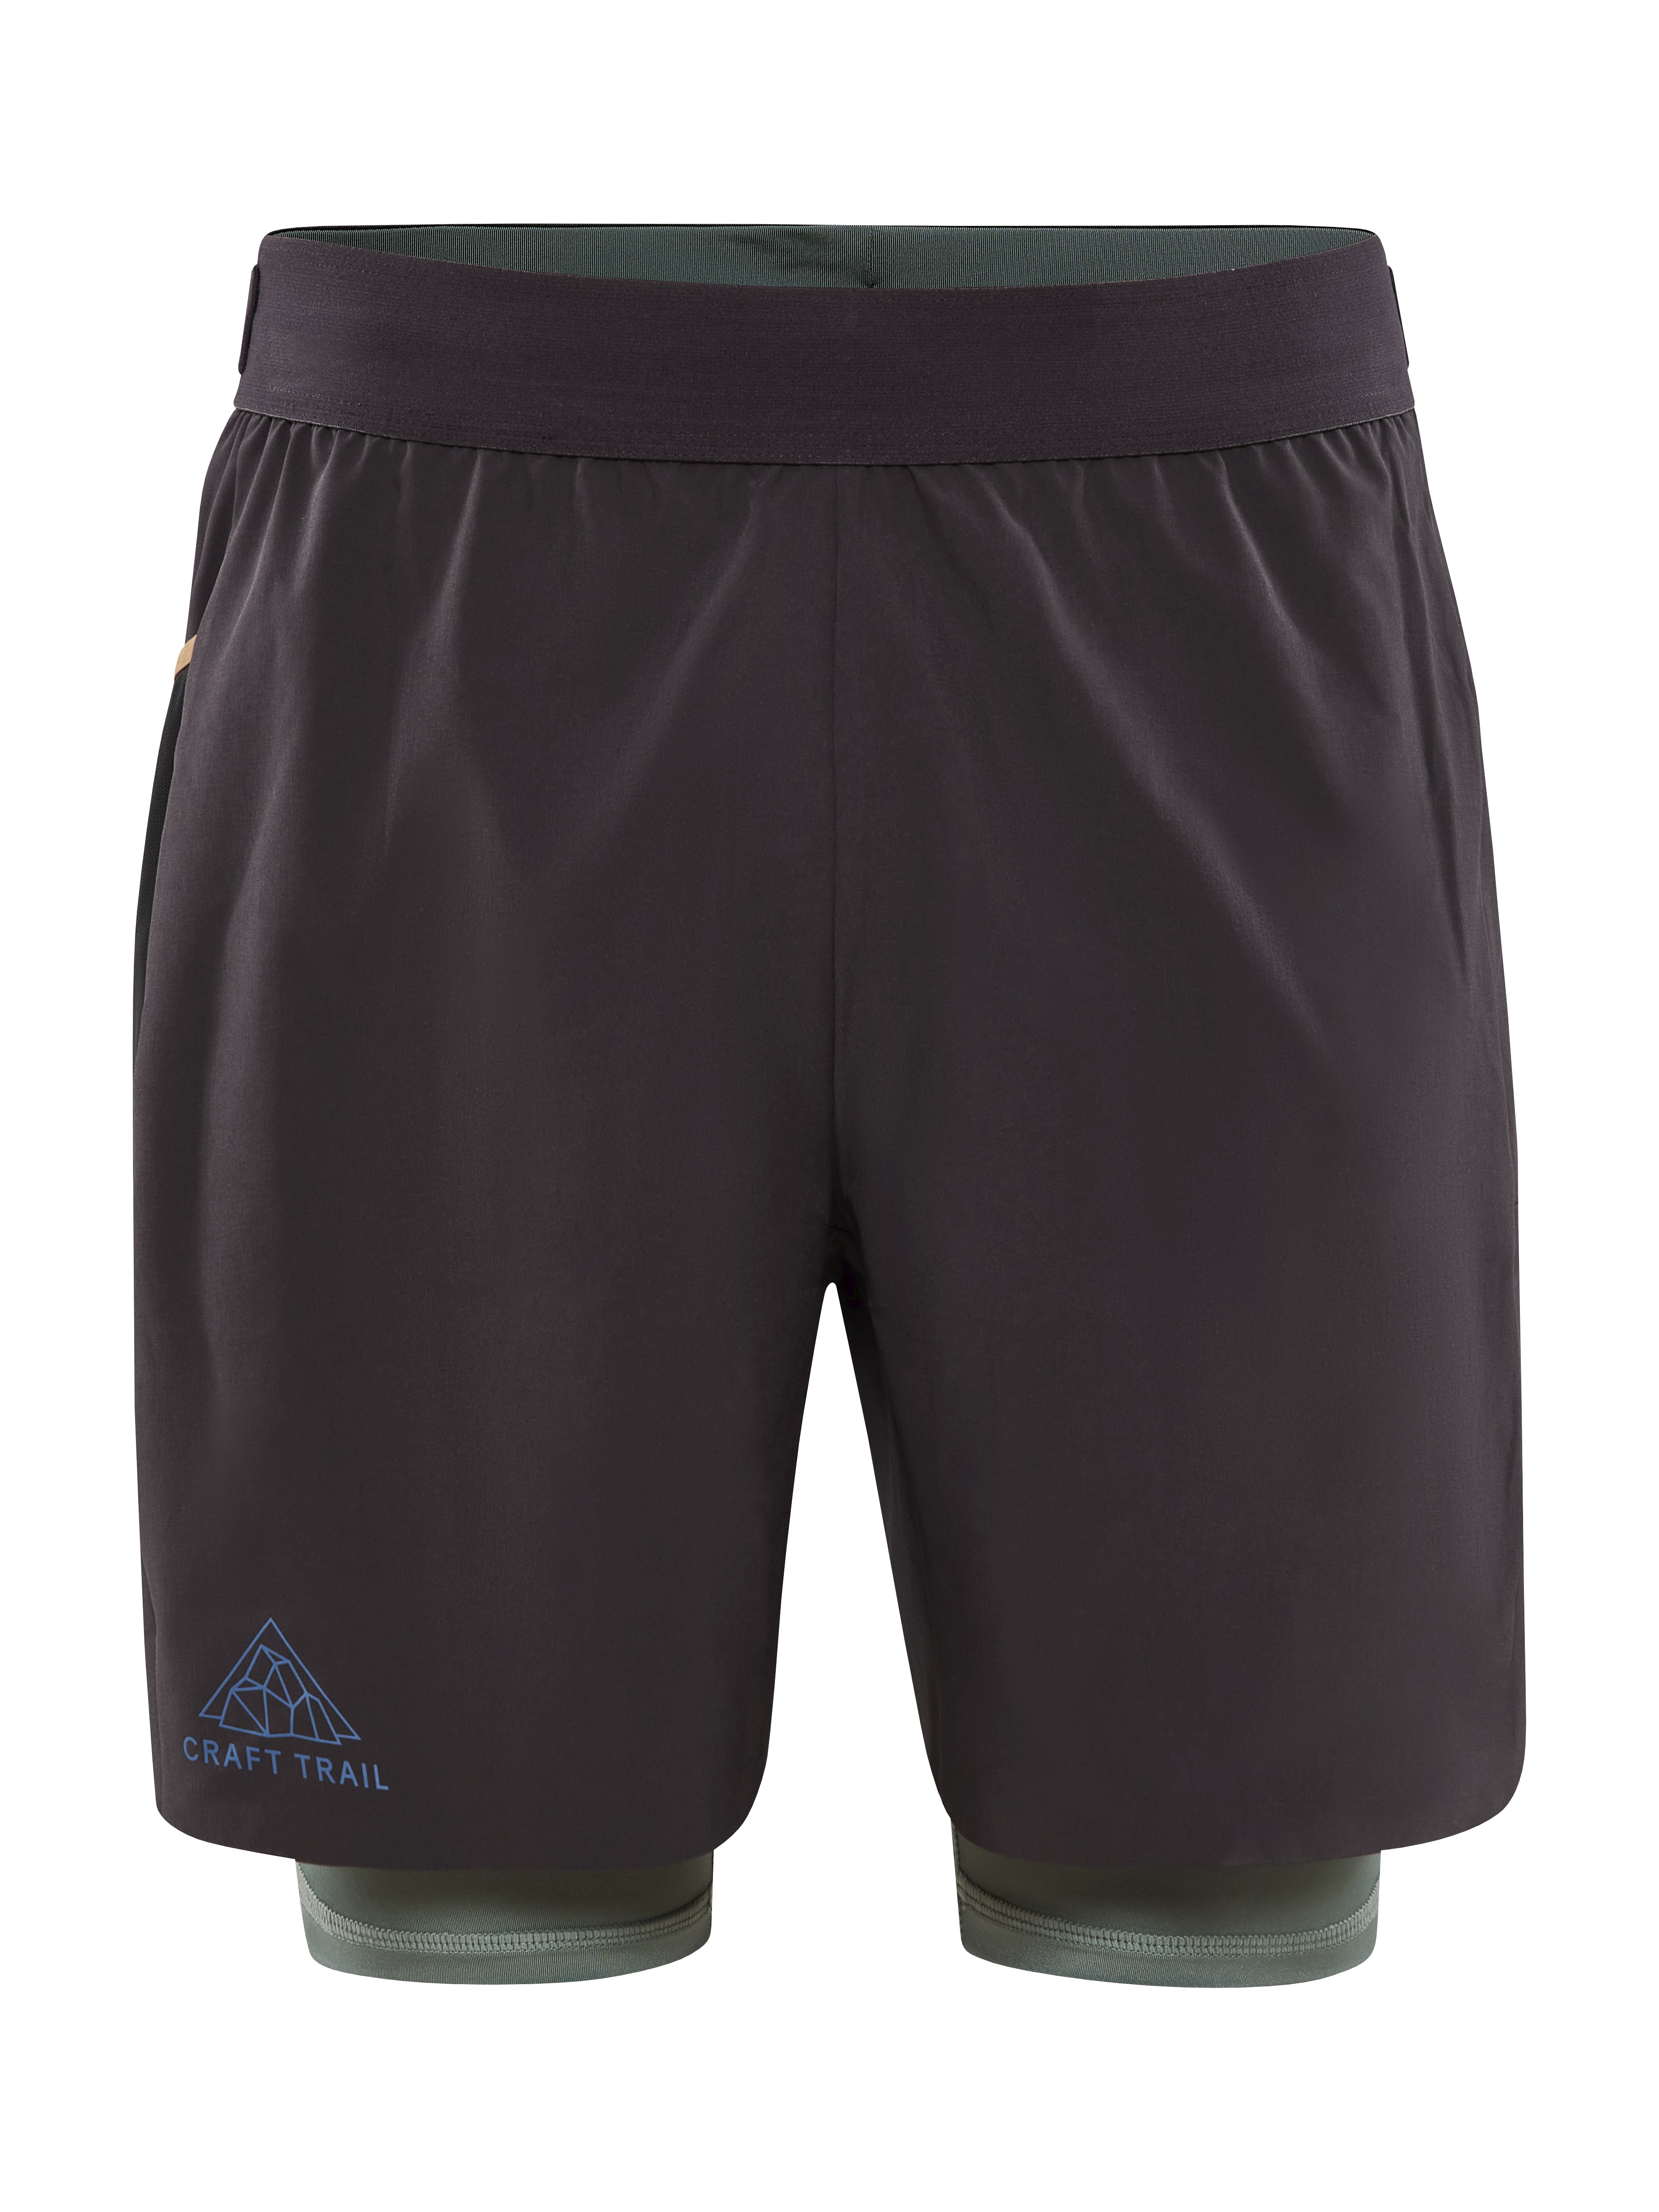 https://craft-products-production.imgix.net/images/3211_8698951e5c-1912447-992626_pro-trail-2in1-shorts-m_front-original.jpg